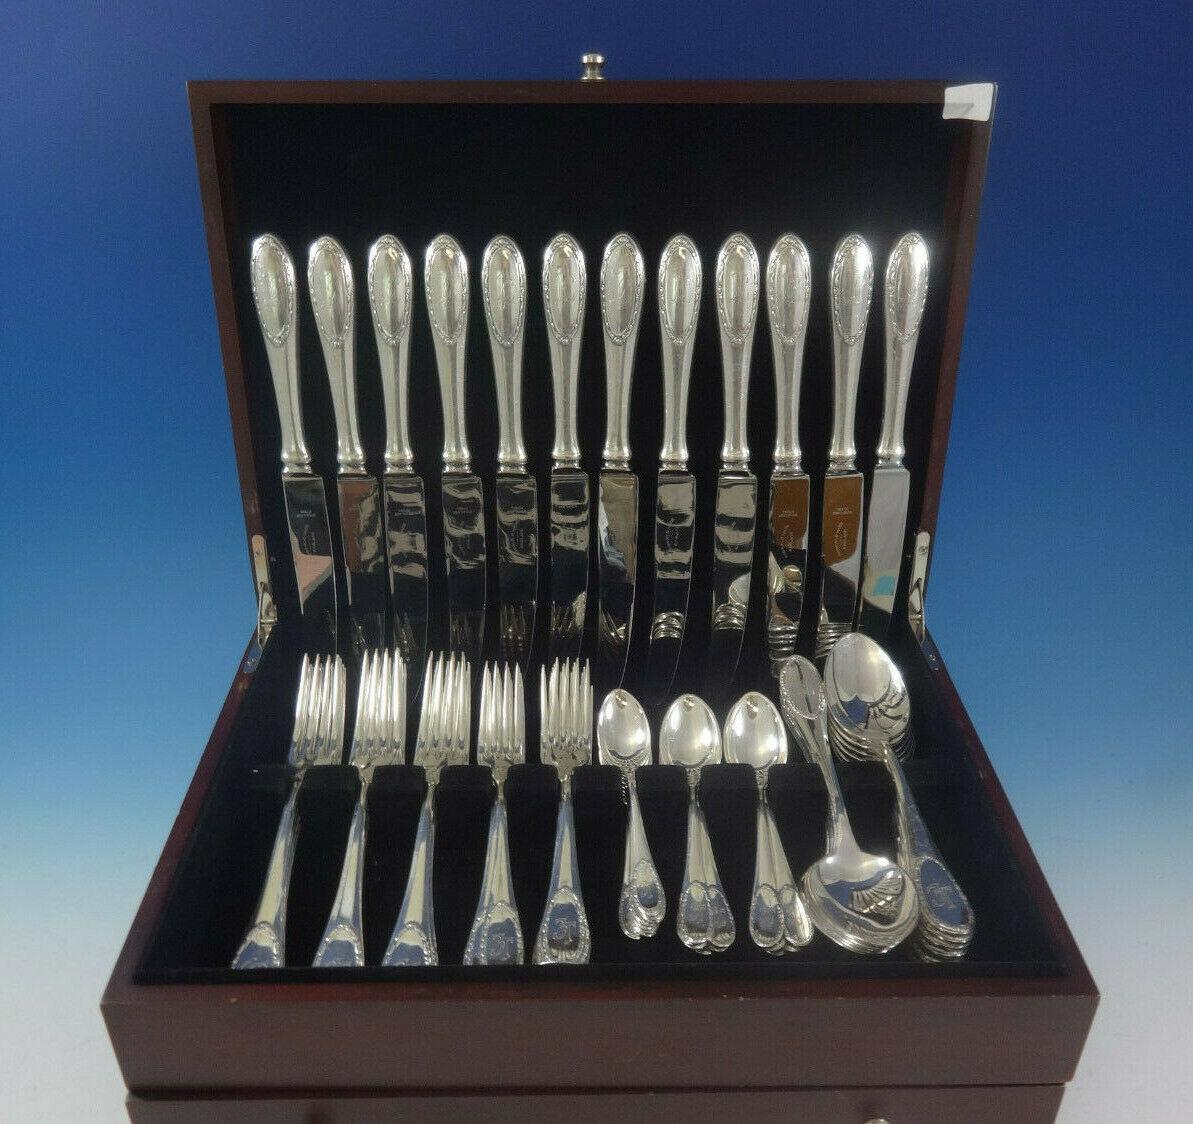 Roses Aka Roschen #86 by Bremer Silberwarenfabrik

Roses Aka Roschen #86 by Bremer Silberwarenfabrik Tea Tura (Bsf 90) German dinner silver plated flatware set of 70 pieces. This set includes:

12 dinner knives, 9 3/4